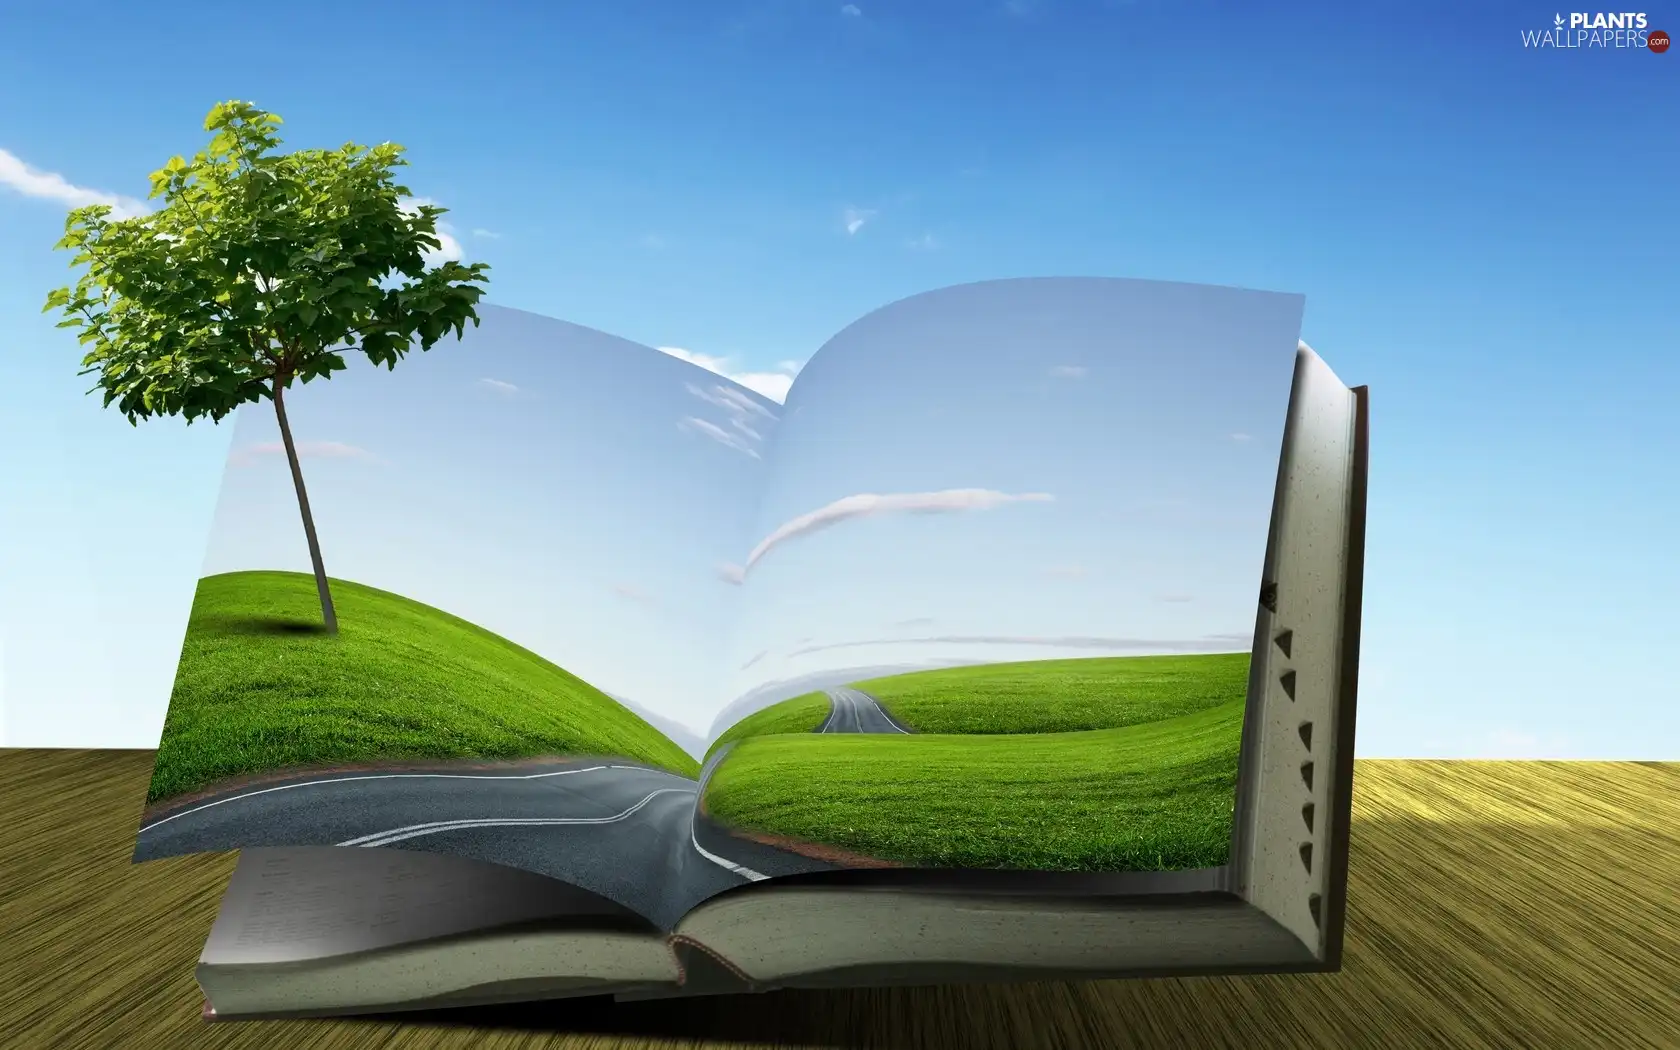 grass, Book, lonely, trees, Sky, Way